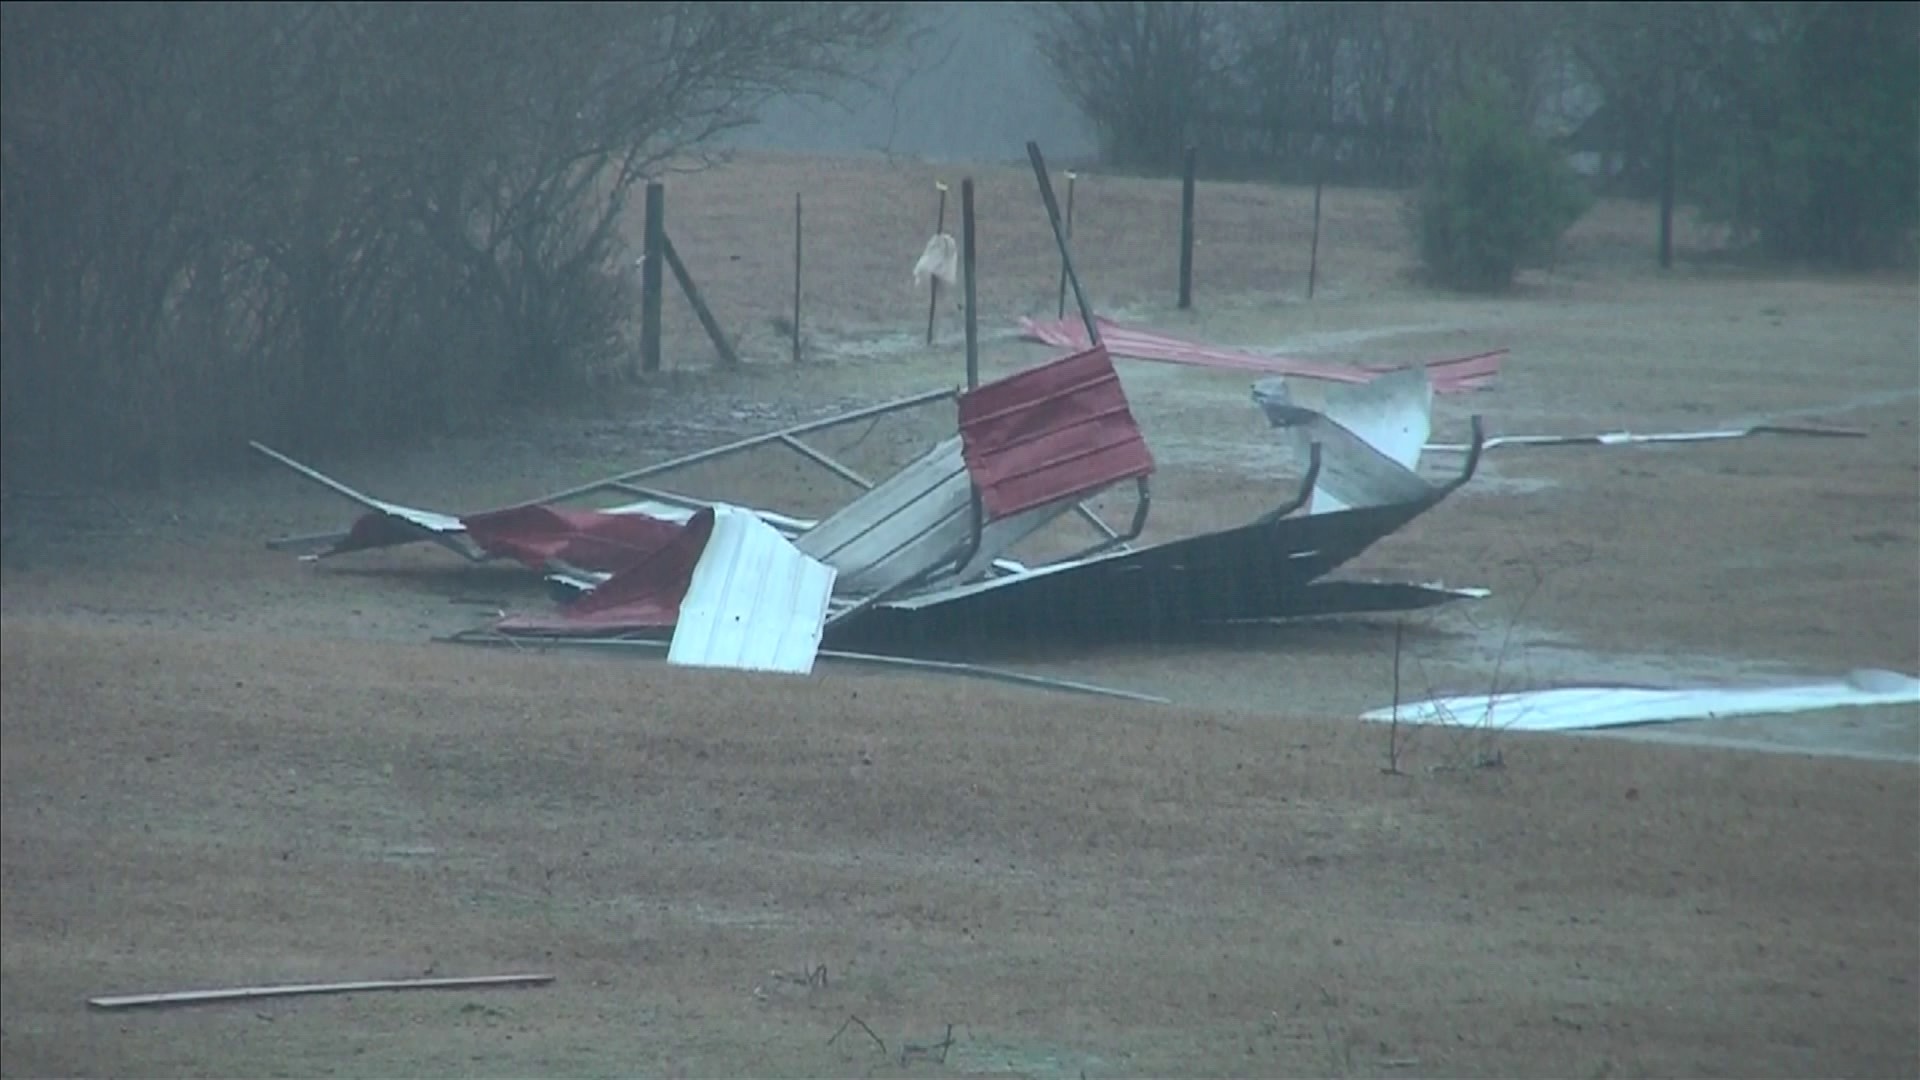 The National Weather Service has completed their survey of the damage and found that an EF-0 touched down in DeSoto County near Olive Branch